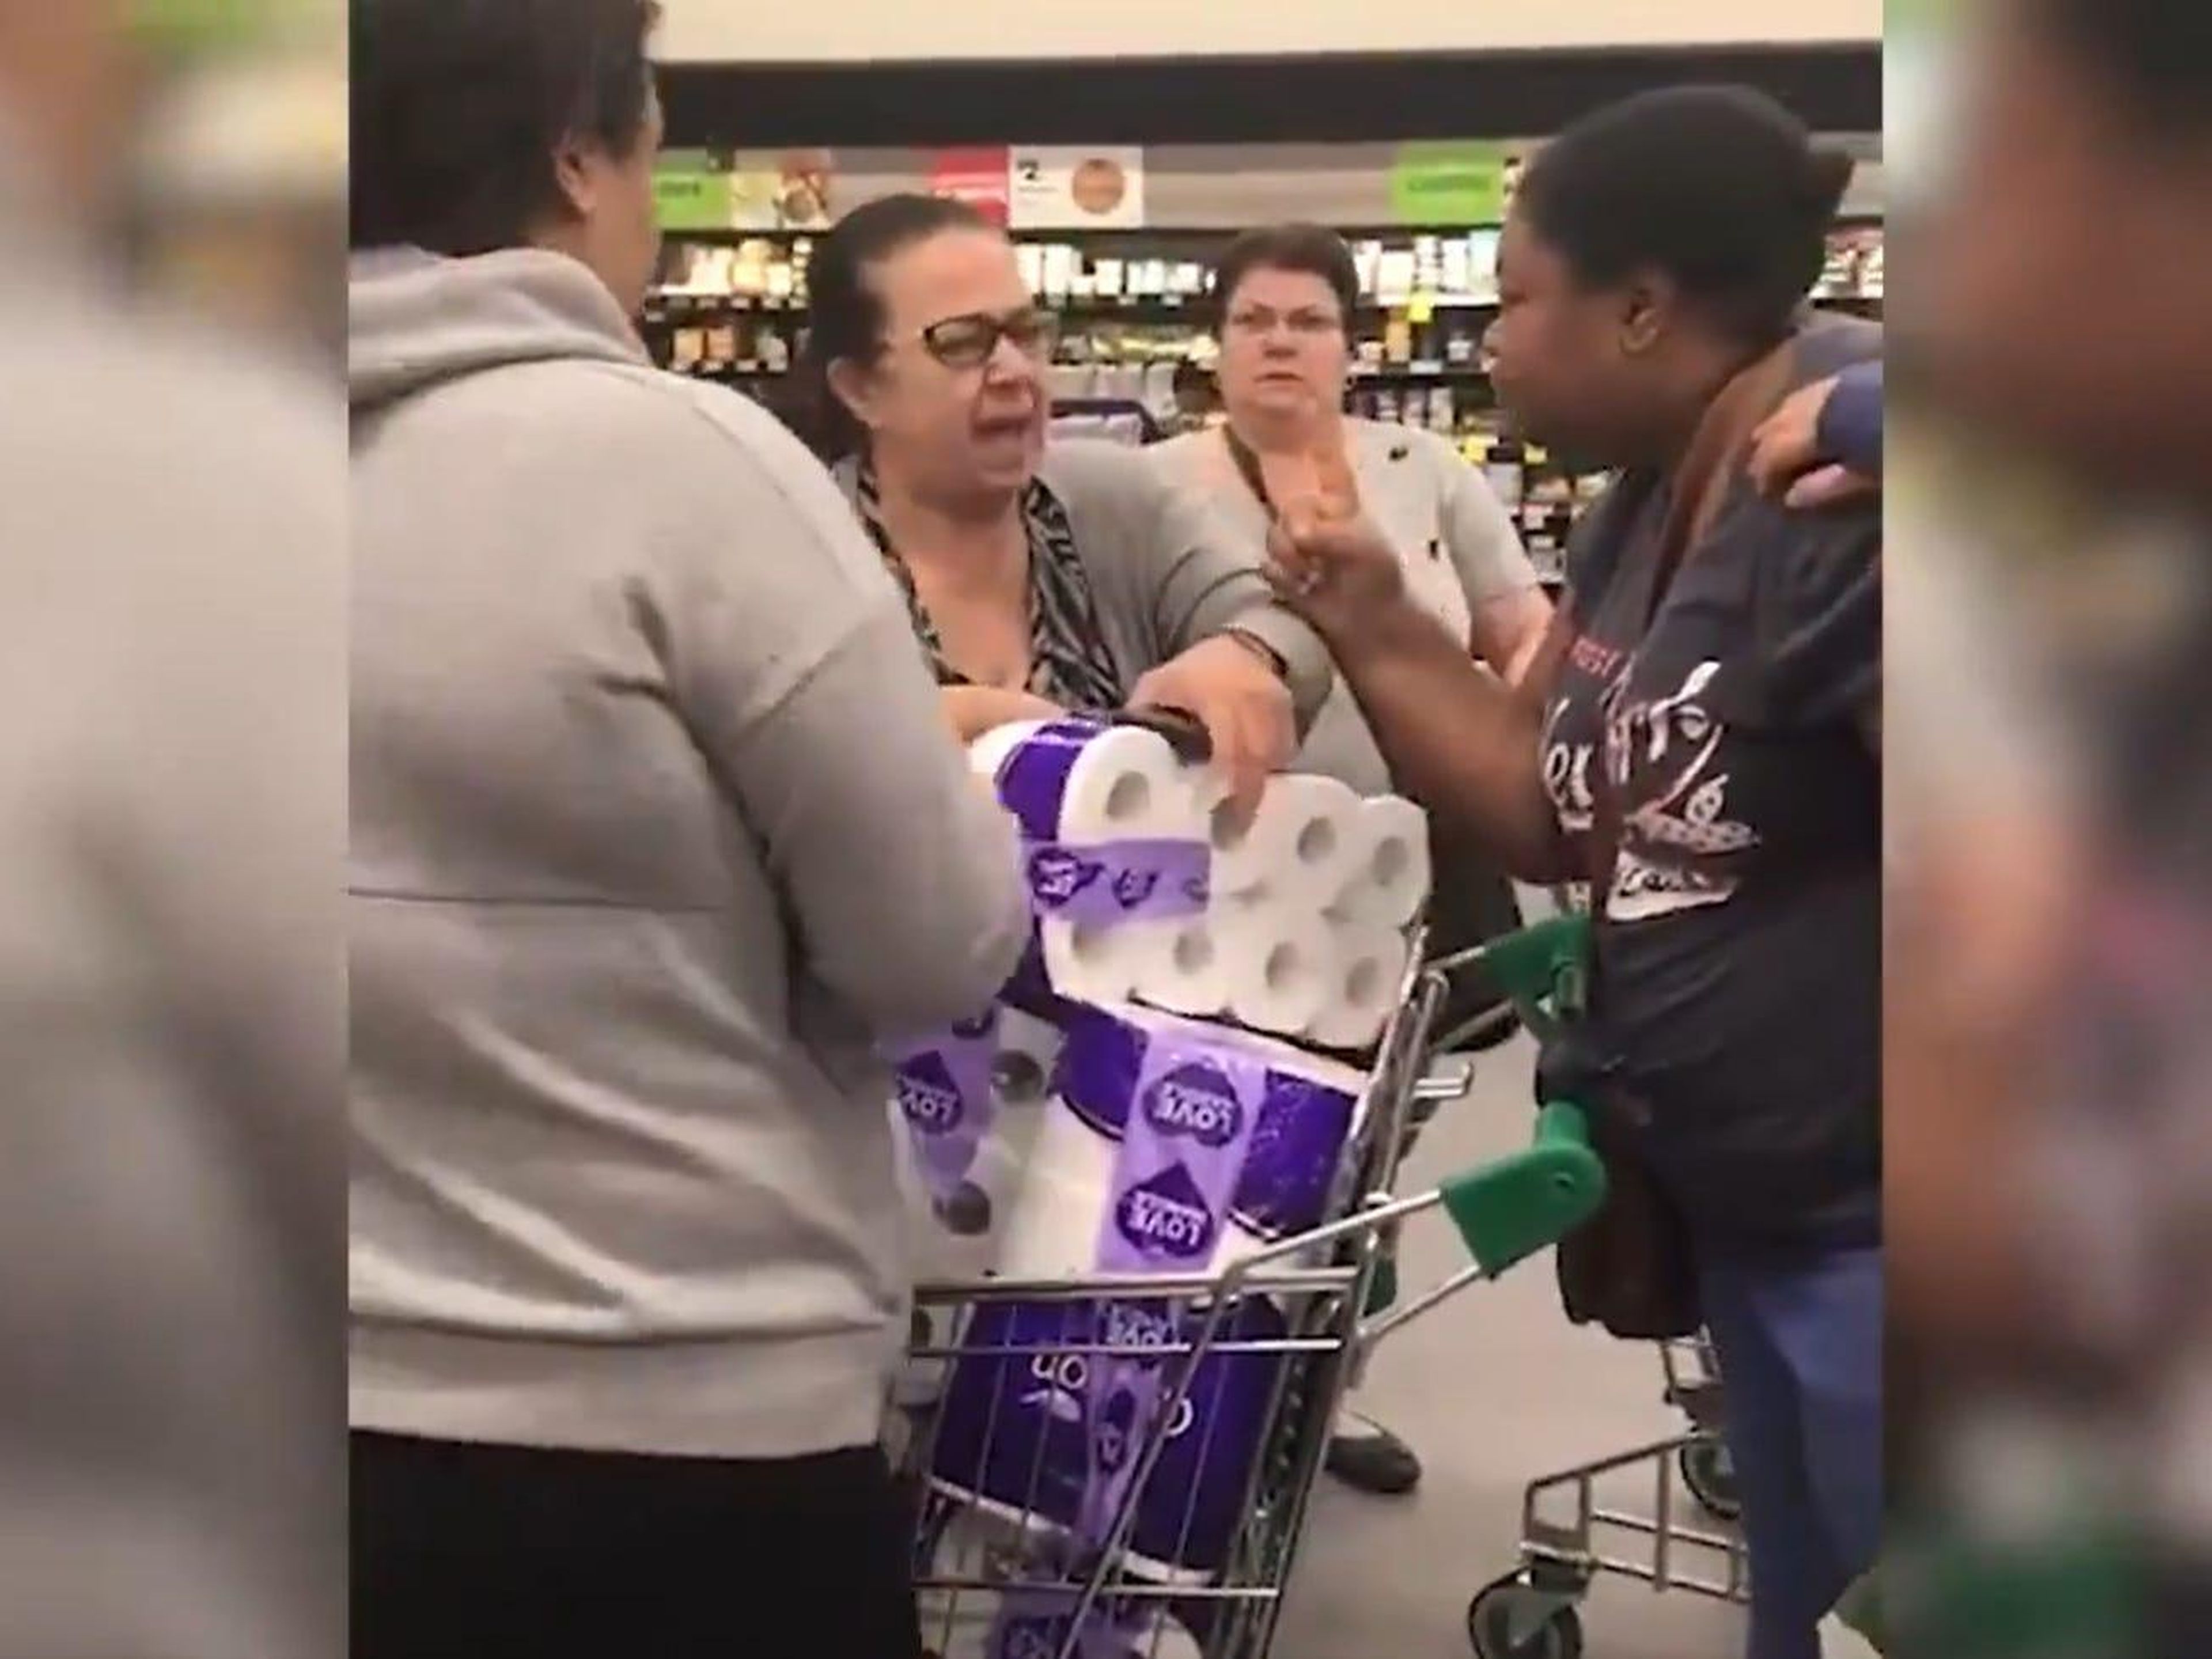 Elsewhere in Australia, the fight for toilet paper got heated. On March 6 a fight over toilet paper at a supermarket in Chullora, a suburb outside Sydney, got so bad that police had to intervene.